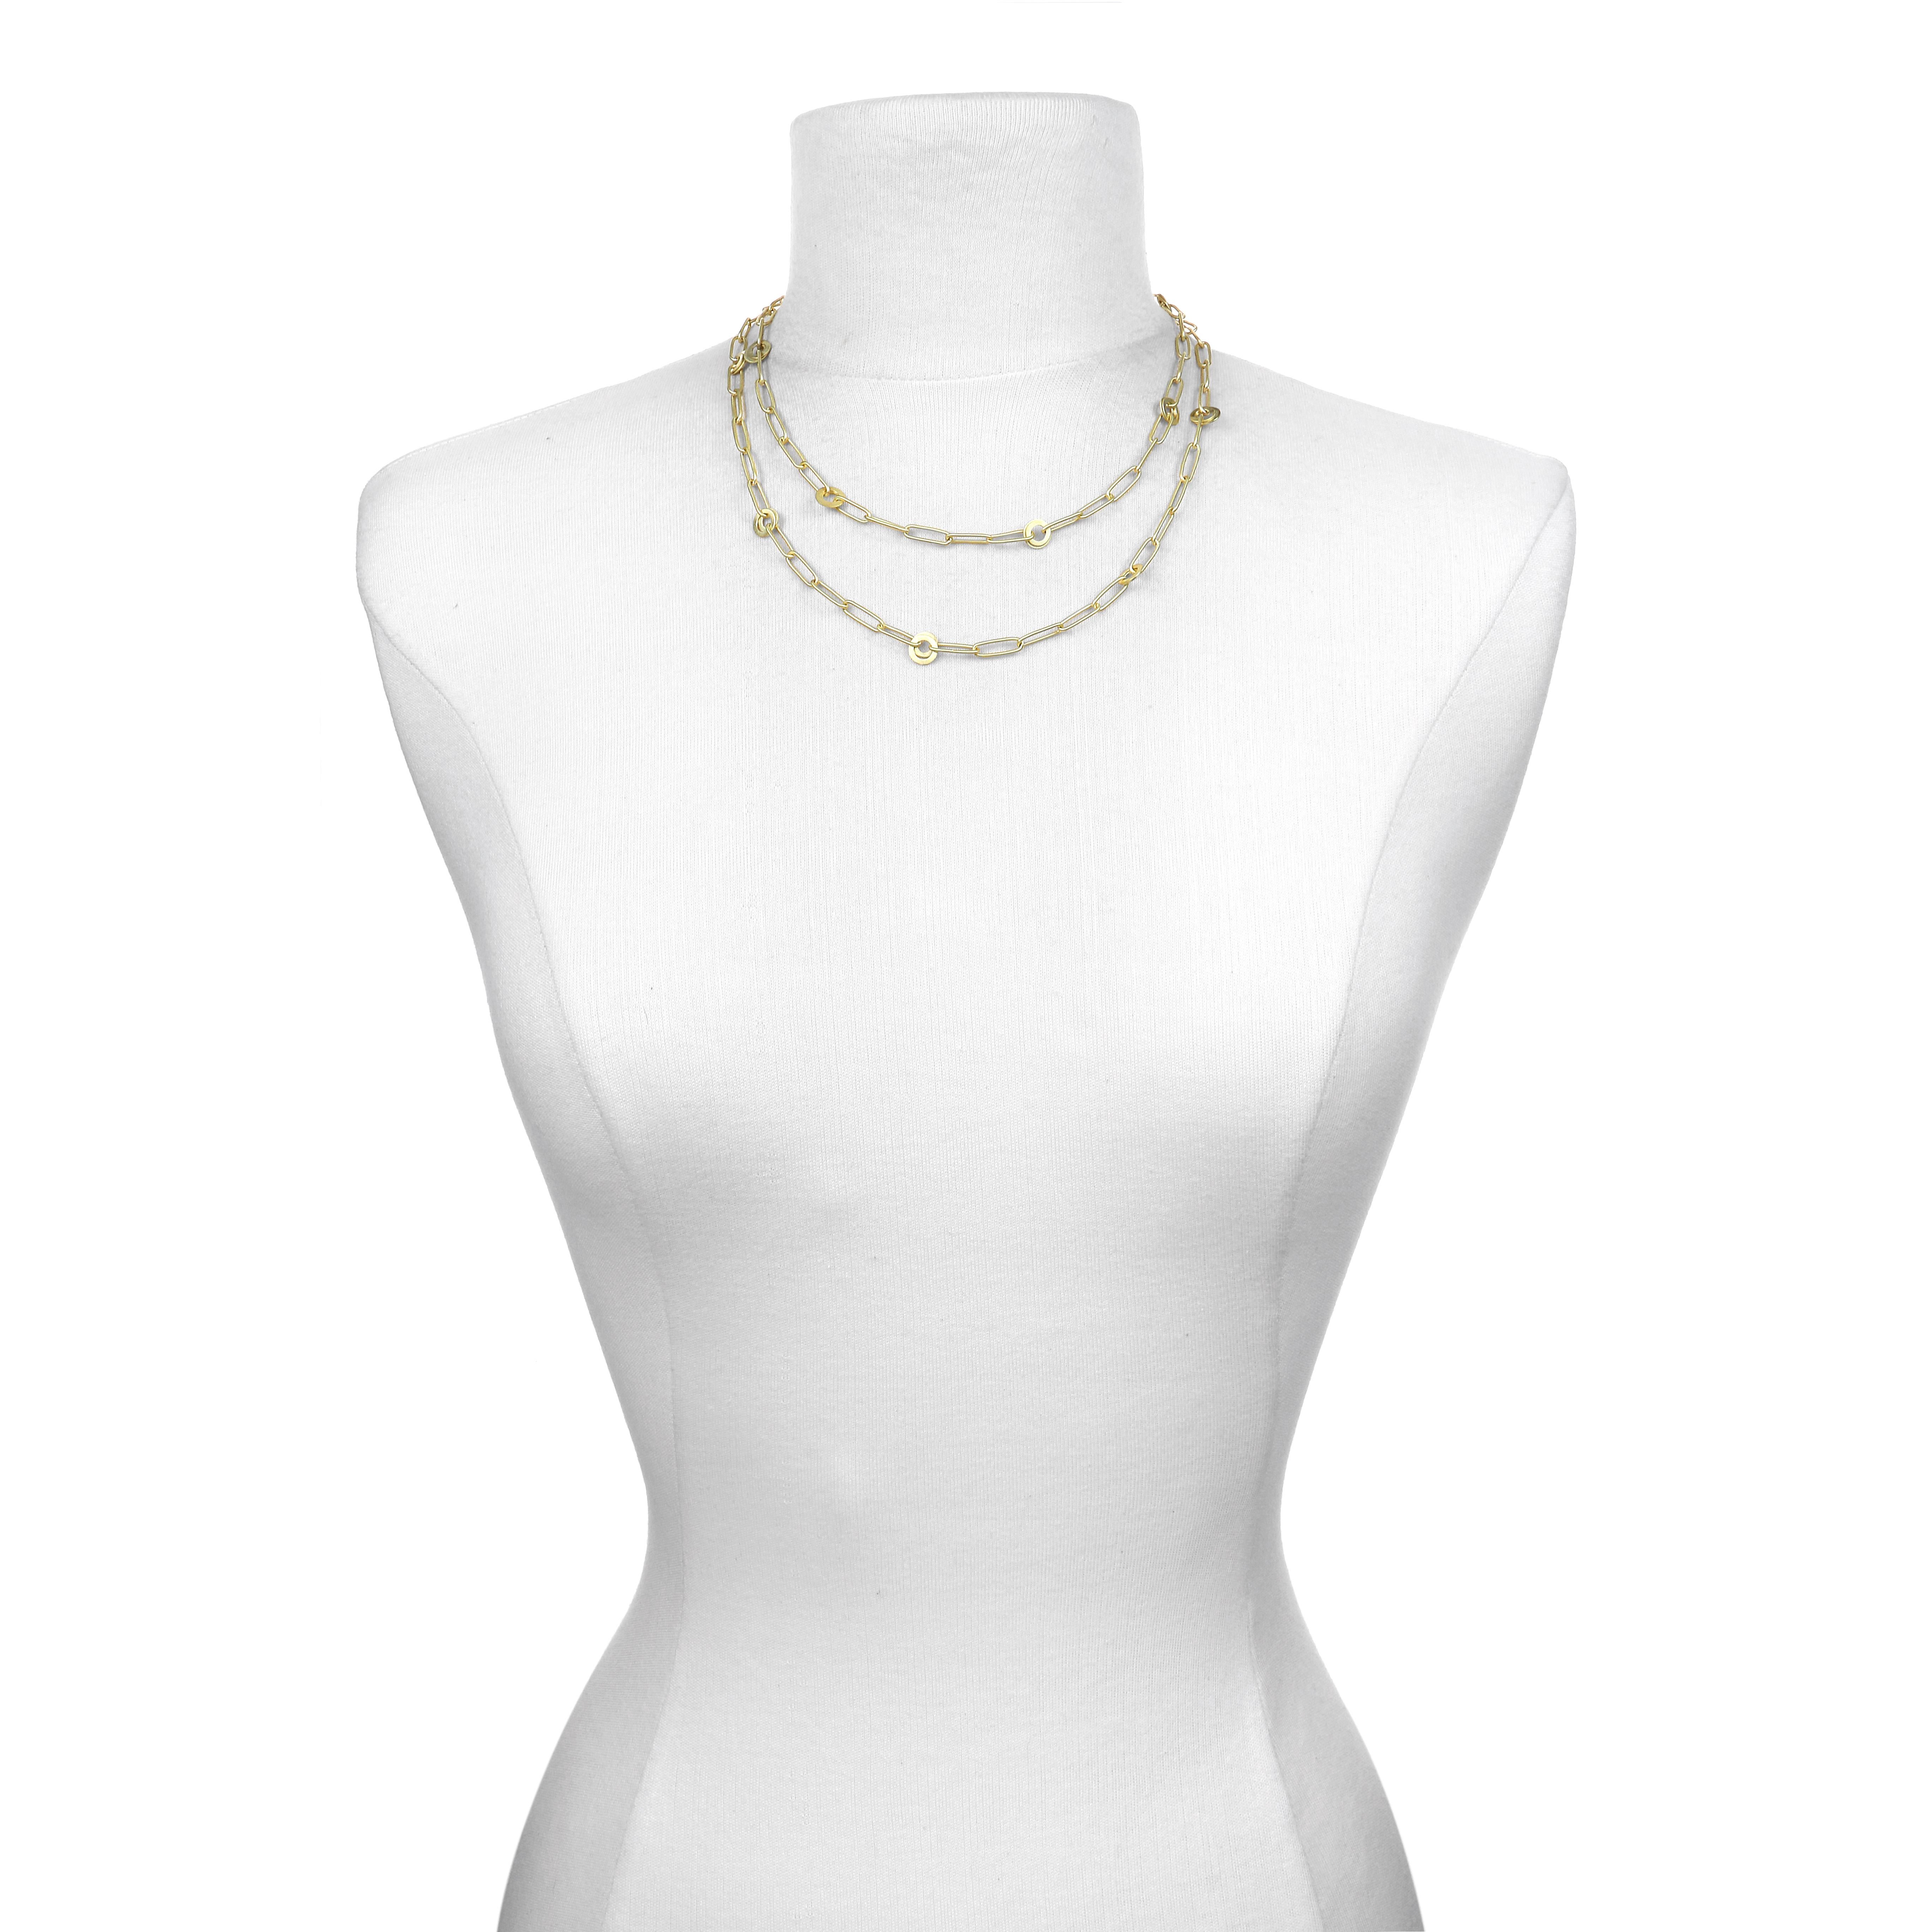   Experience everyday luxury. One of Faye Kim's best selling chains, the paperclip chain embellished with planished round links can be adjusted to multiple lengths or doubled for a shorter, layered look. Also terrific when layered with shorter